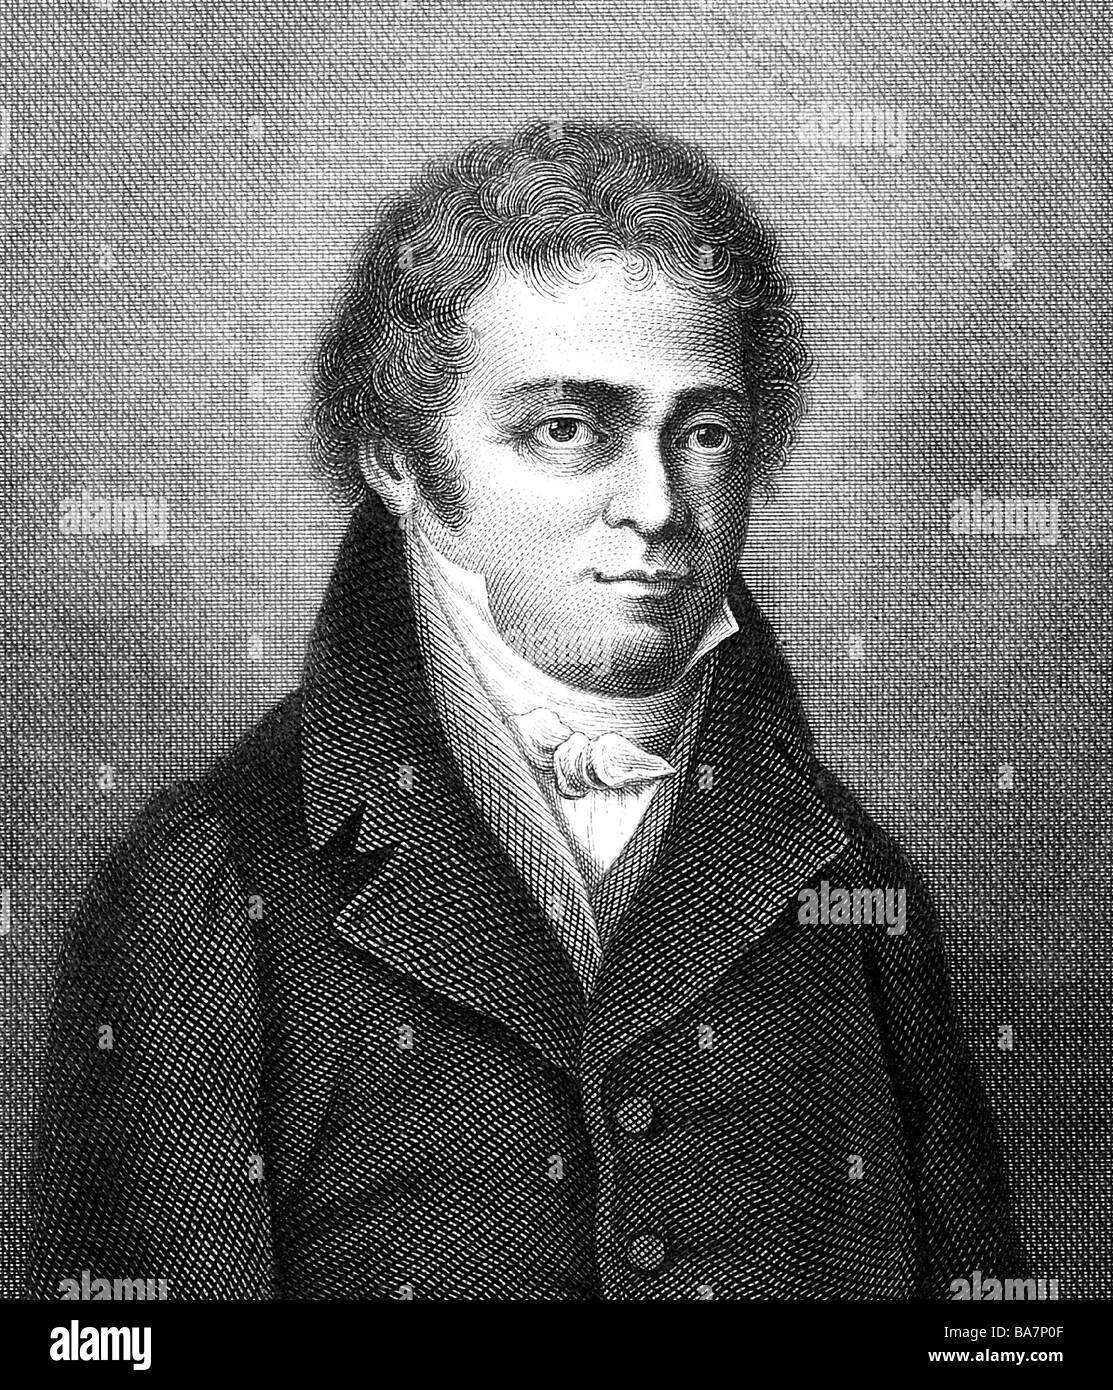 Senefelder, Alois, 6.11.1771 - 26.2.1834, Austrian actor, inventor of the printing technique of lithography in 1796, copper engraving by Nordheim, 19th century, , Artist's Copyright has not to be cleared Stock Photo